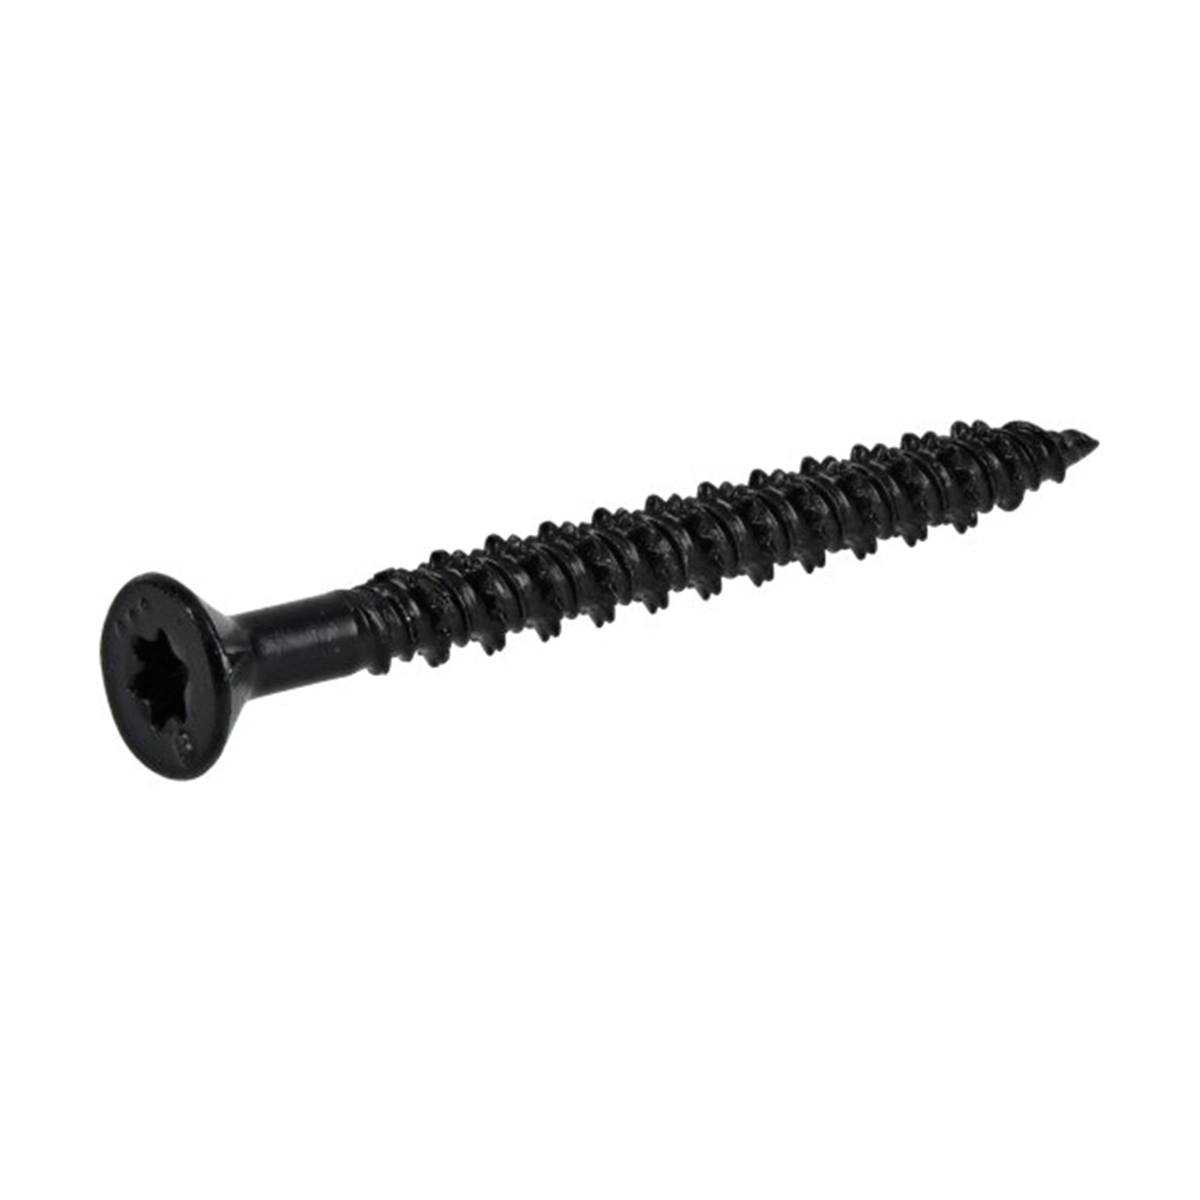 376599 Concrete Screw Anchor, 3/16 in Dia, 2-1/4 in L, Carbon Steel, Epoxy-Coated, 100/PK